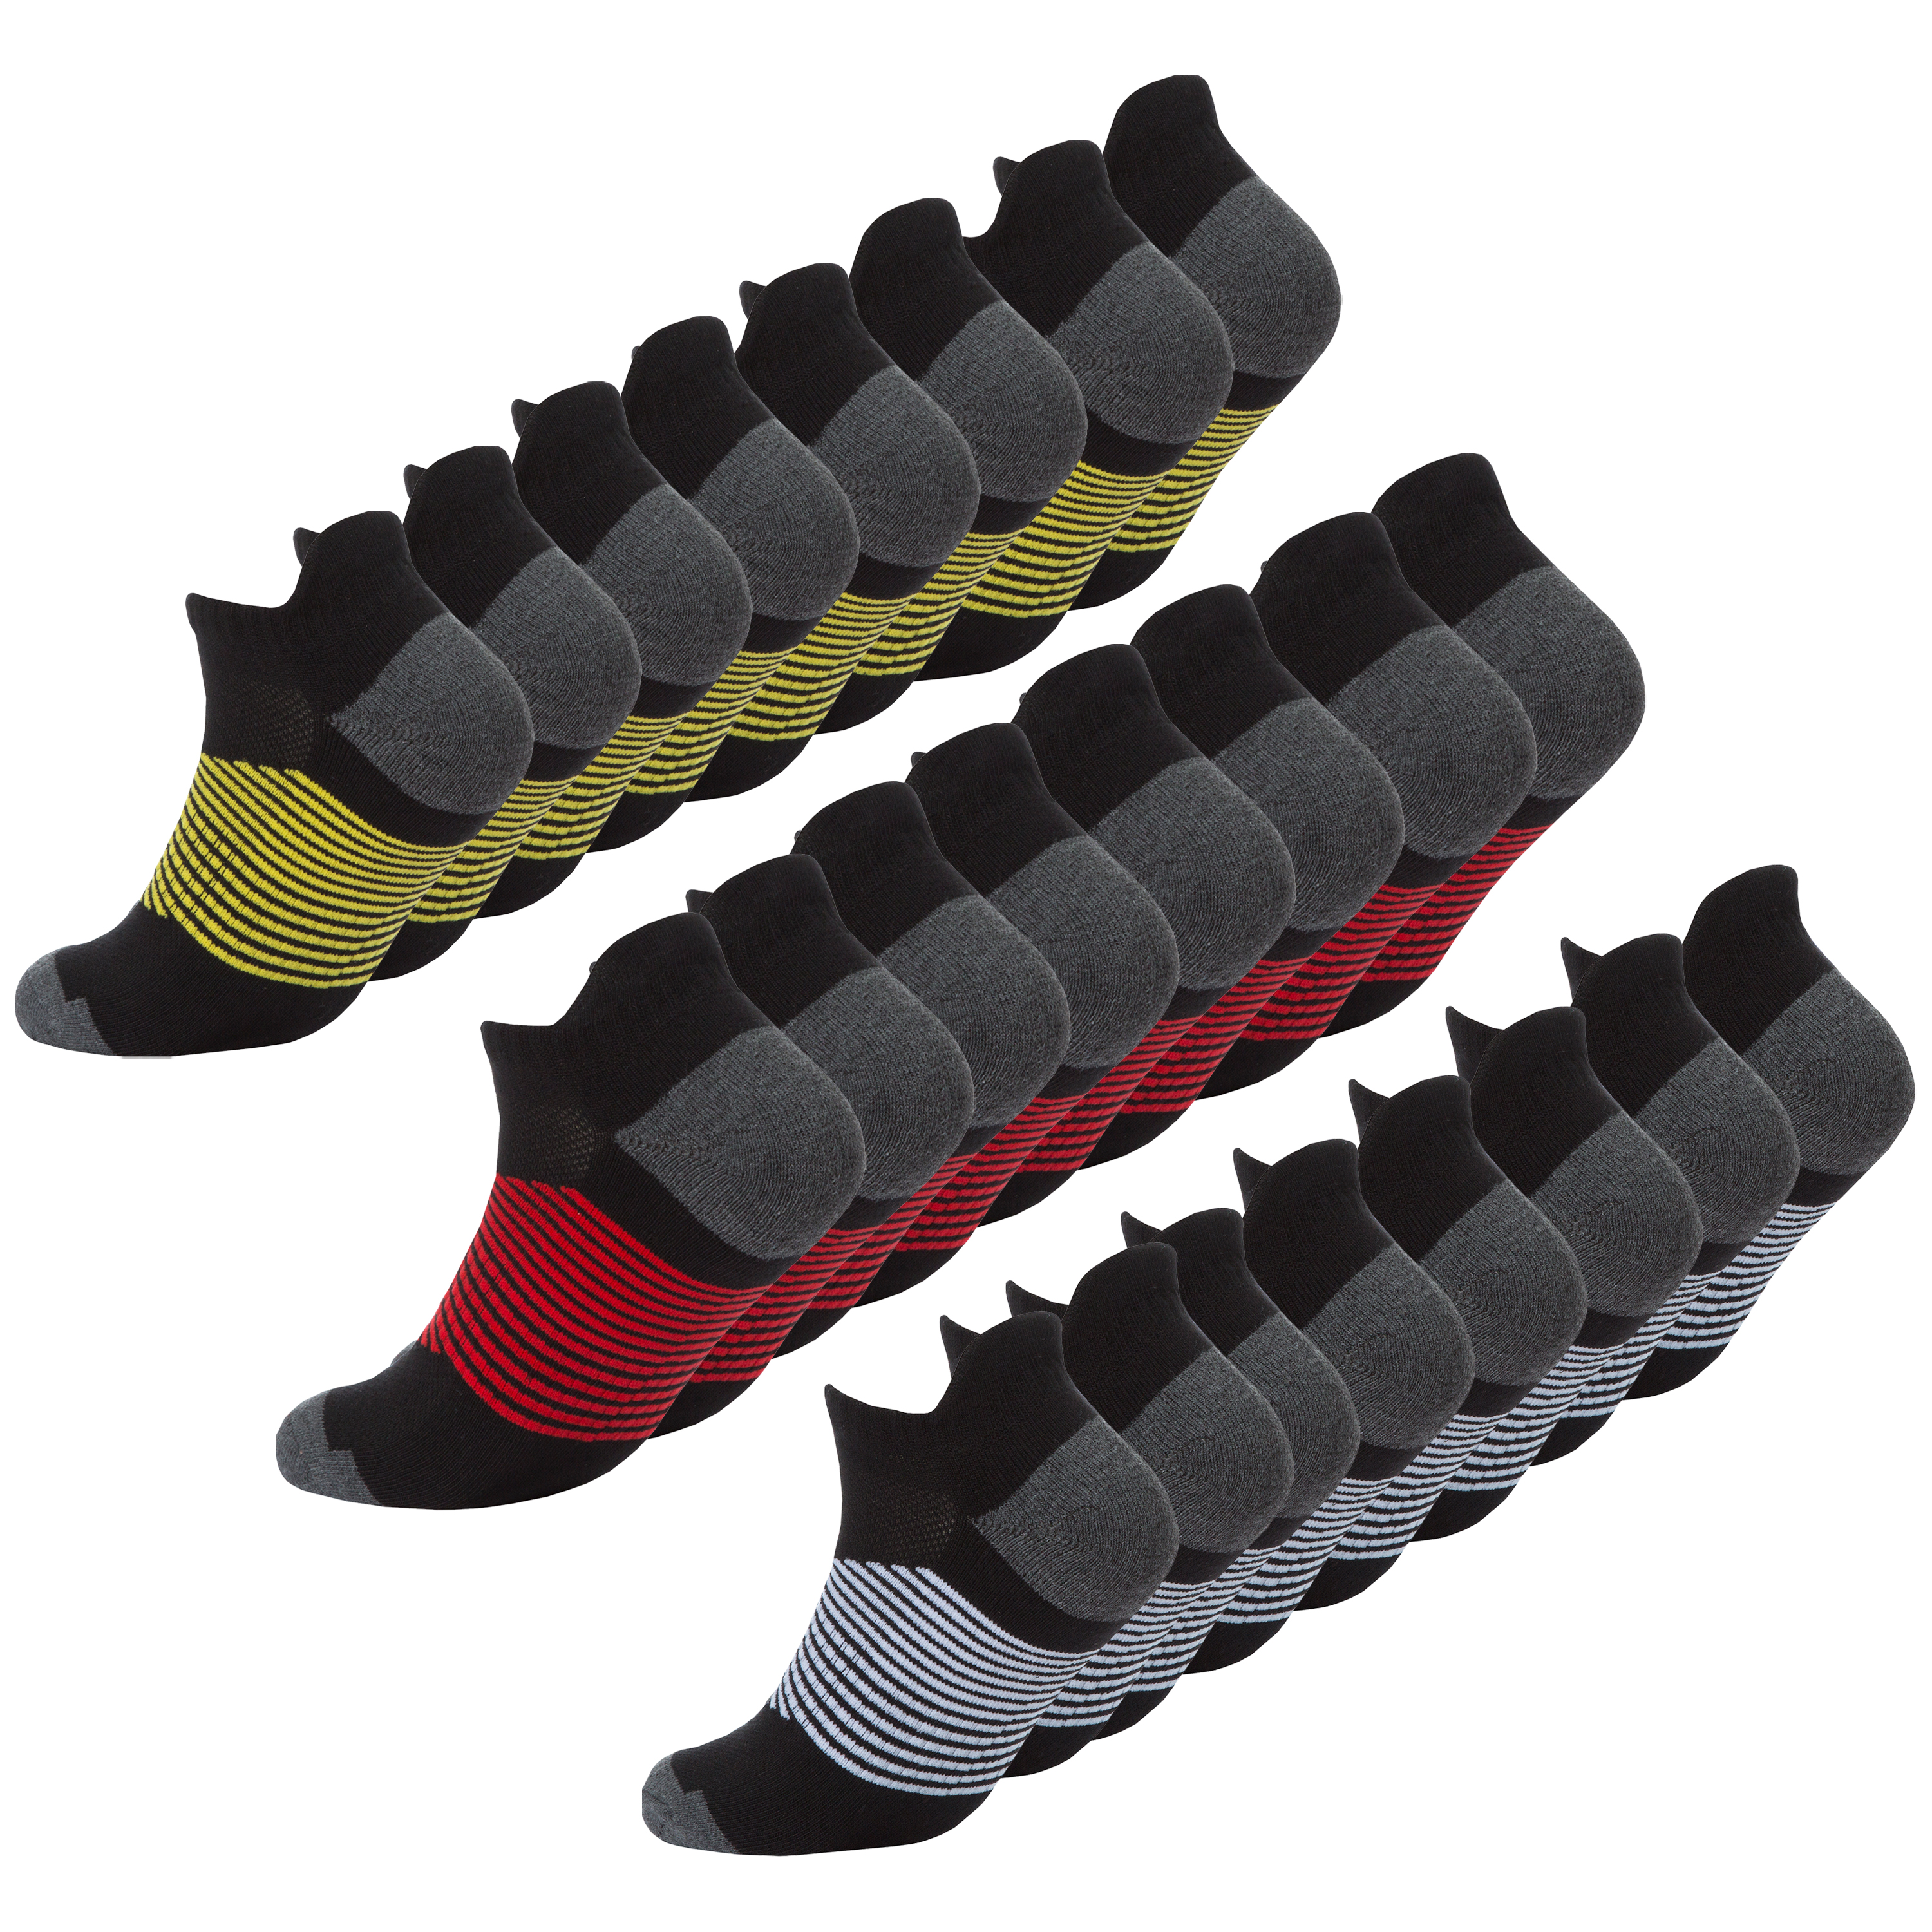 Mens 3 Pairs Sport Trainer Socks Ankle Low Rise Gym Black Cushioned Size UK 6-11